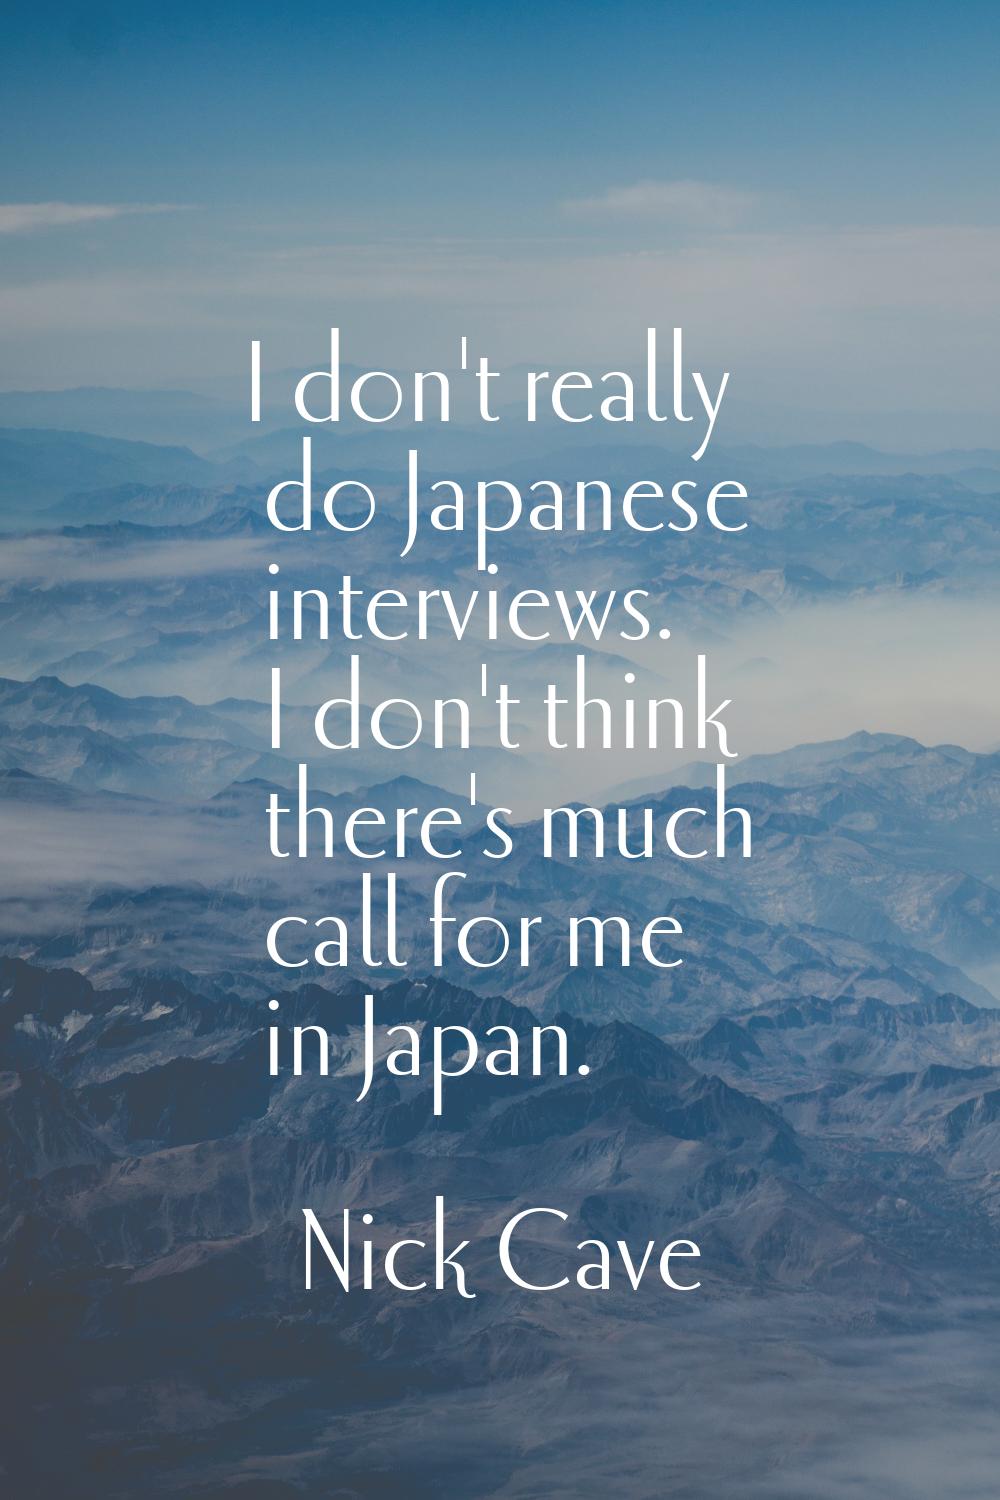 I don't really do Japanese interviews. I don't think there's much call for me in Japan.